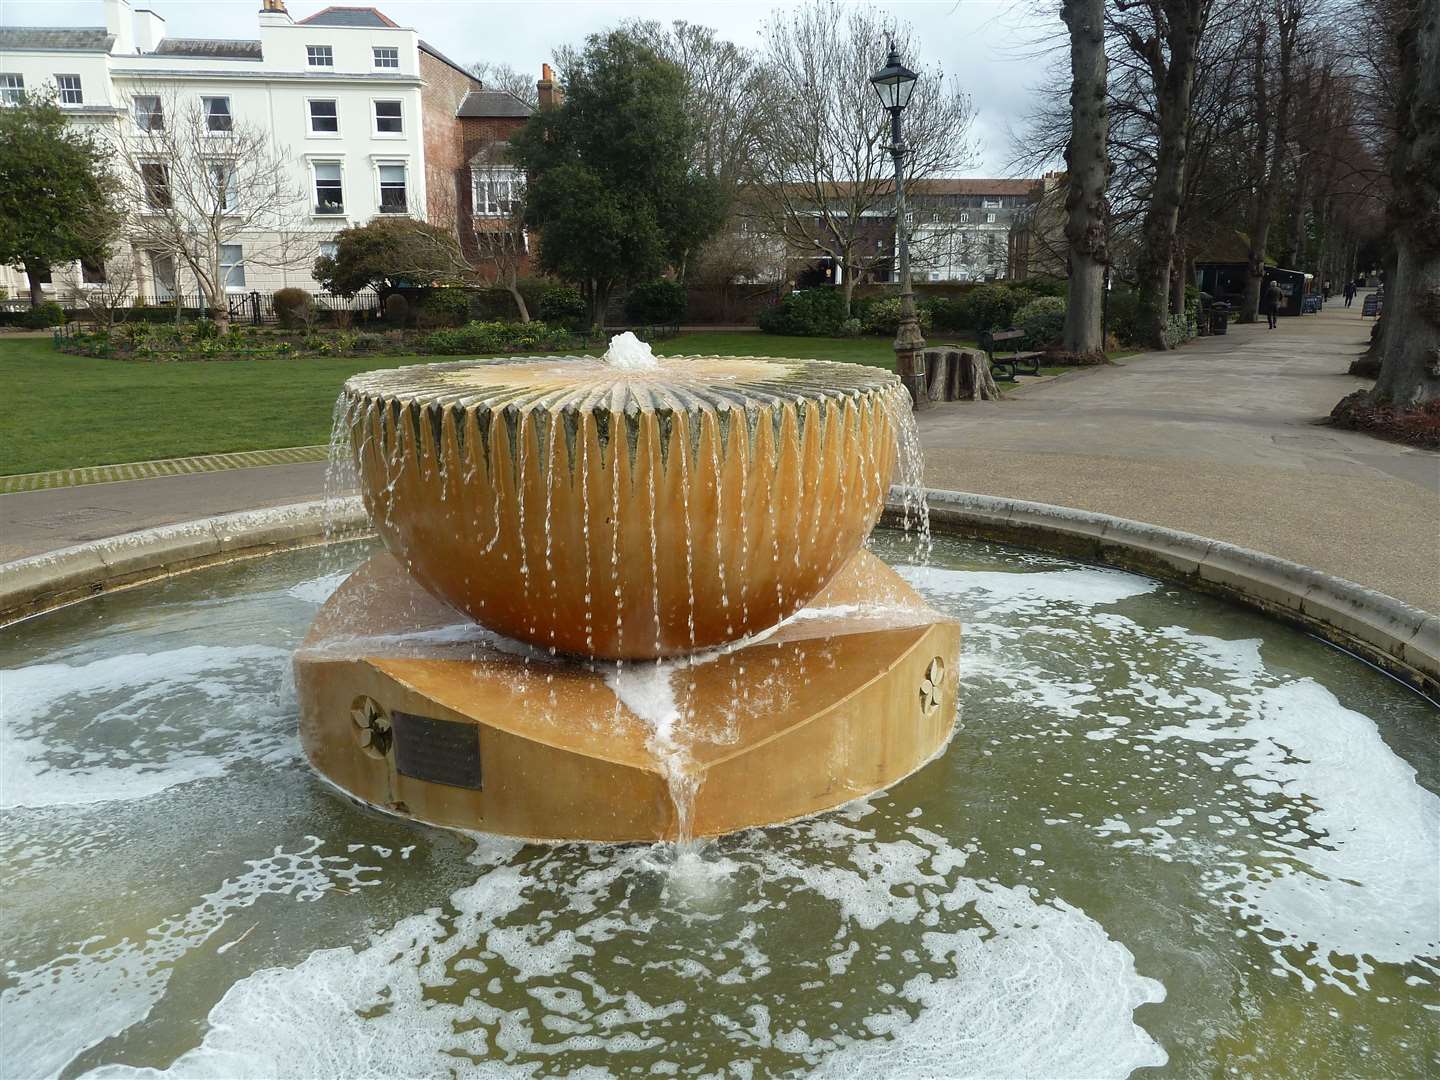 Residents have complained that the park's fountain has not reached its proper height in years. Photo: Mansell Jagger